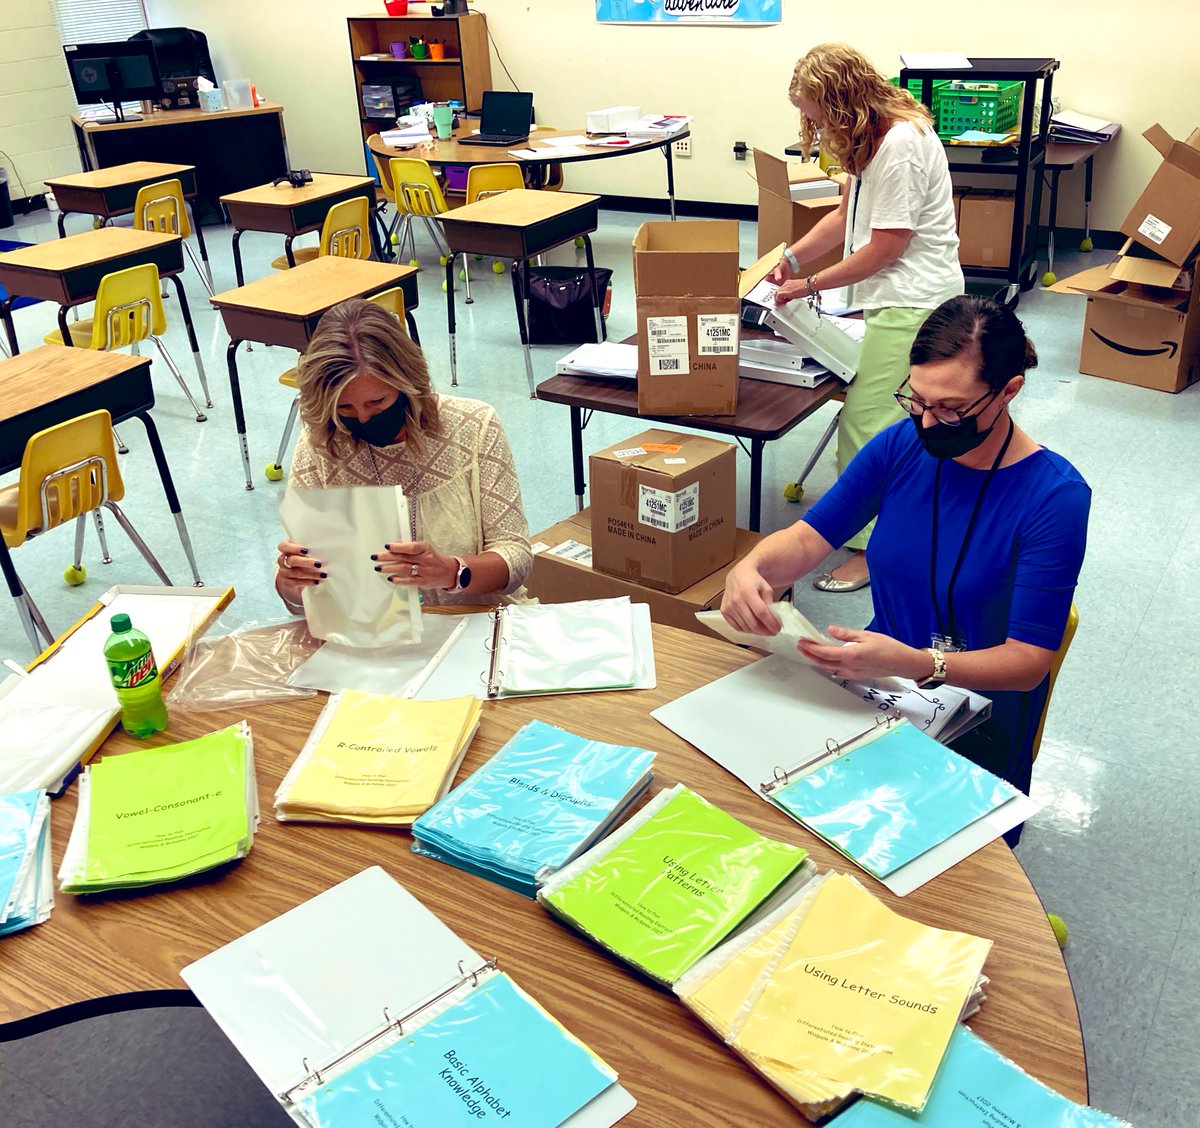 Our amazing @GaeScubs Reading Coach/Specialist & Reading Facilitators are busy creating quality T & S resources for literacy instruction! This assembly line displayed creativity, critical thinking, collaboration, & communication-HLP #LifeReady attributes in action! @HenricoElem